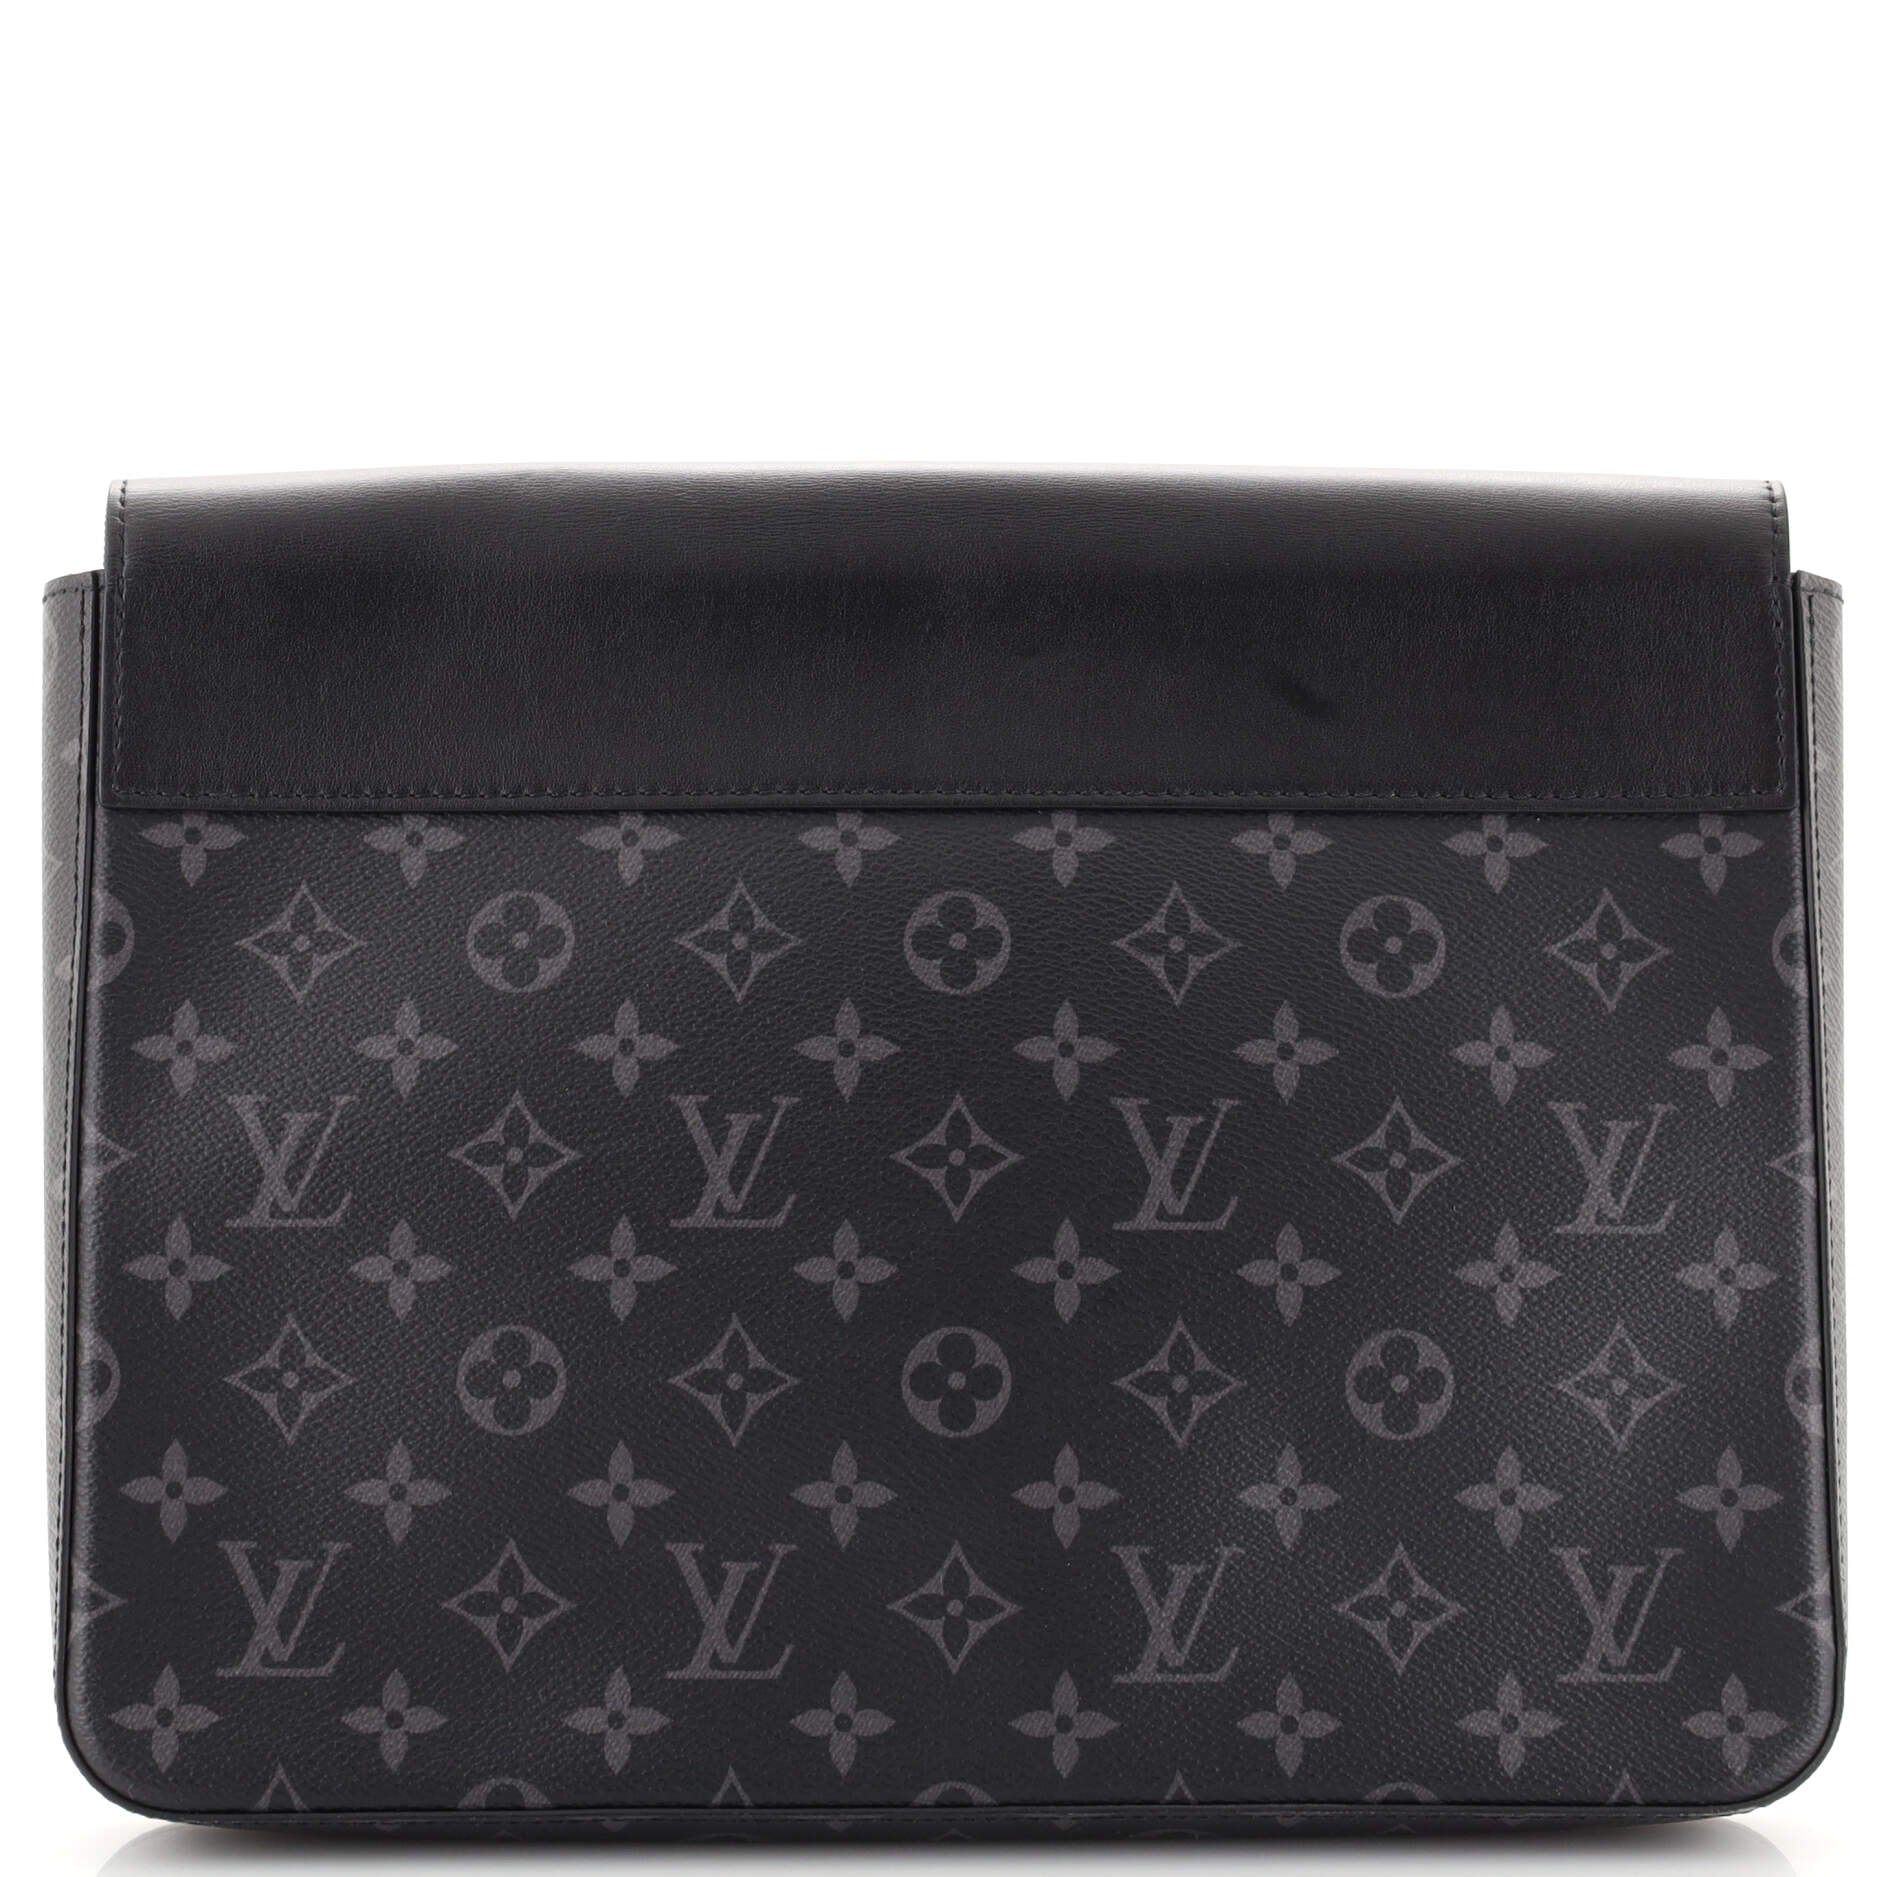 Louis Vuitton Fortune Cookie Bag Monogram Leather and Printed PVC